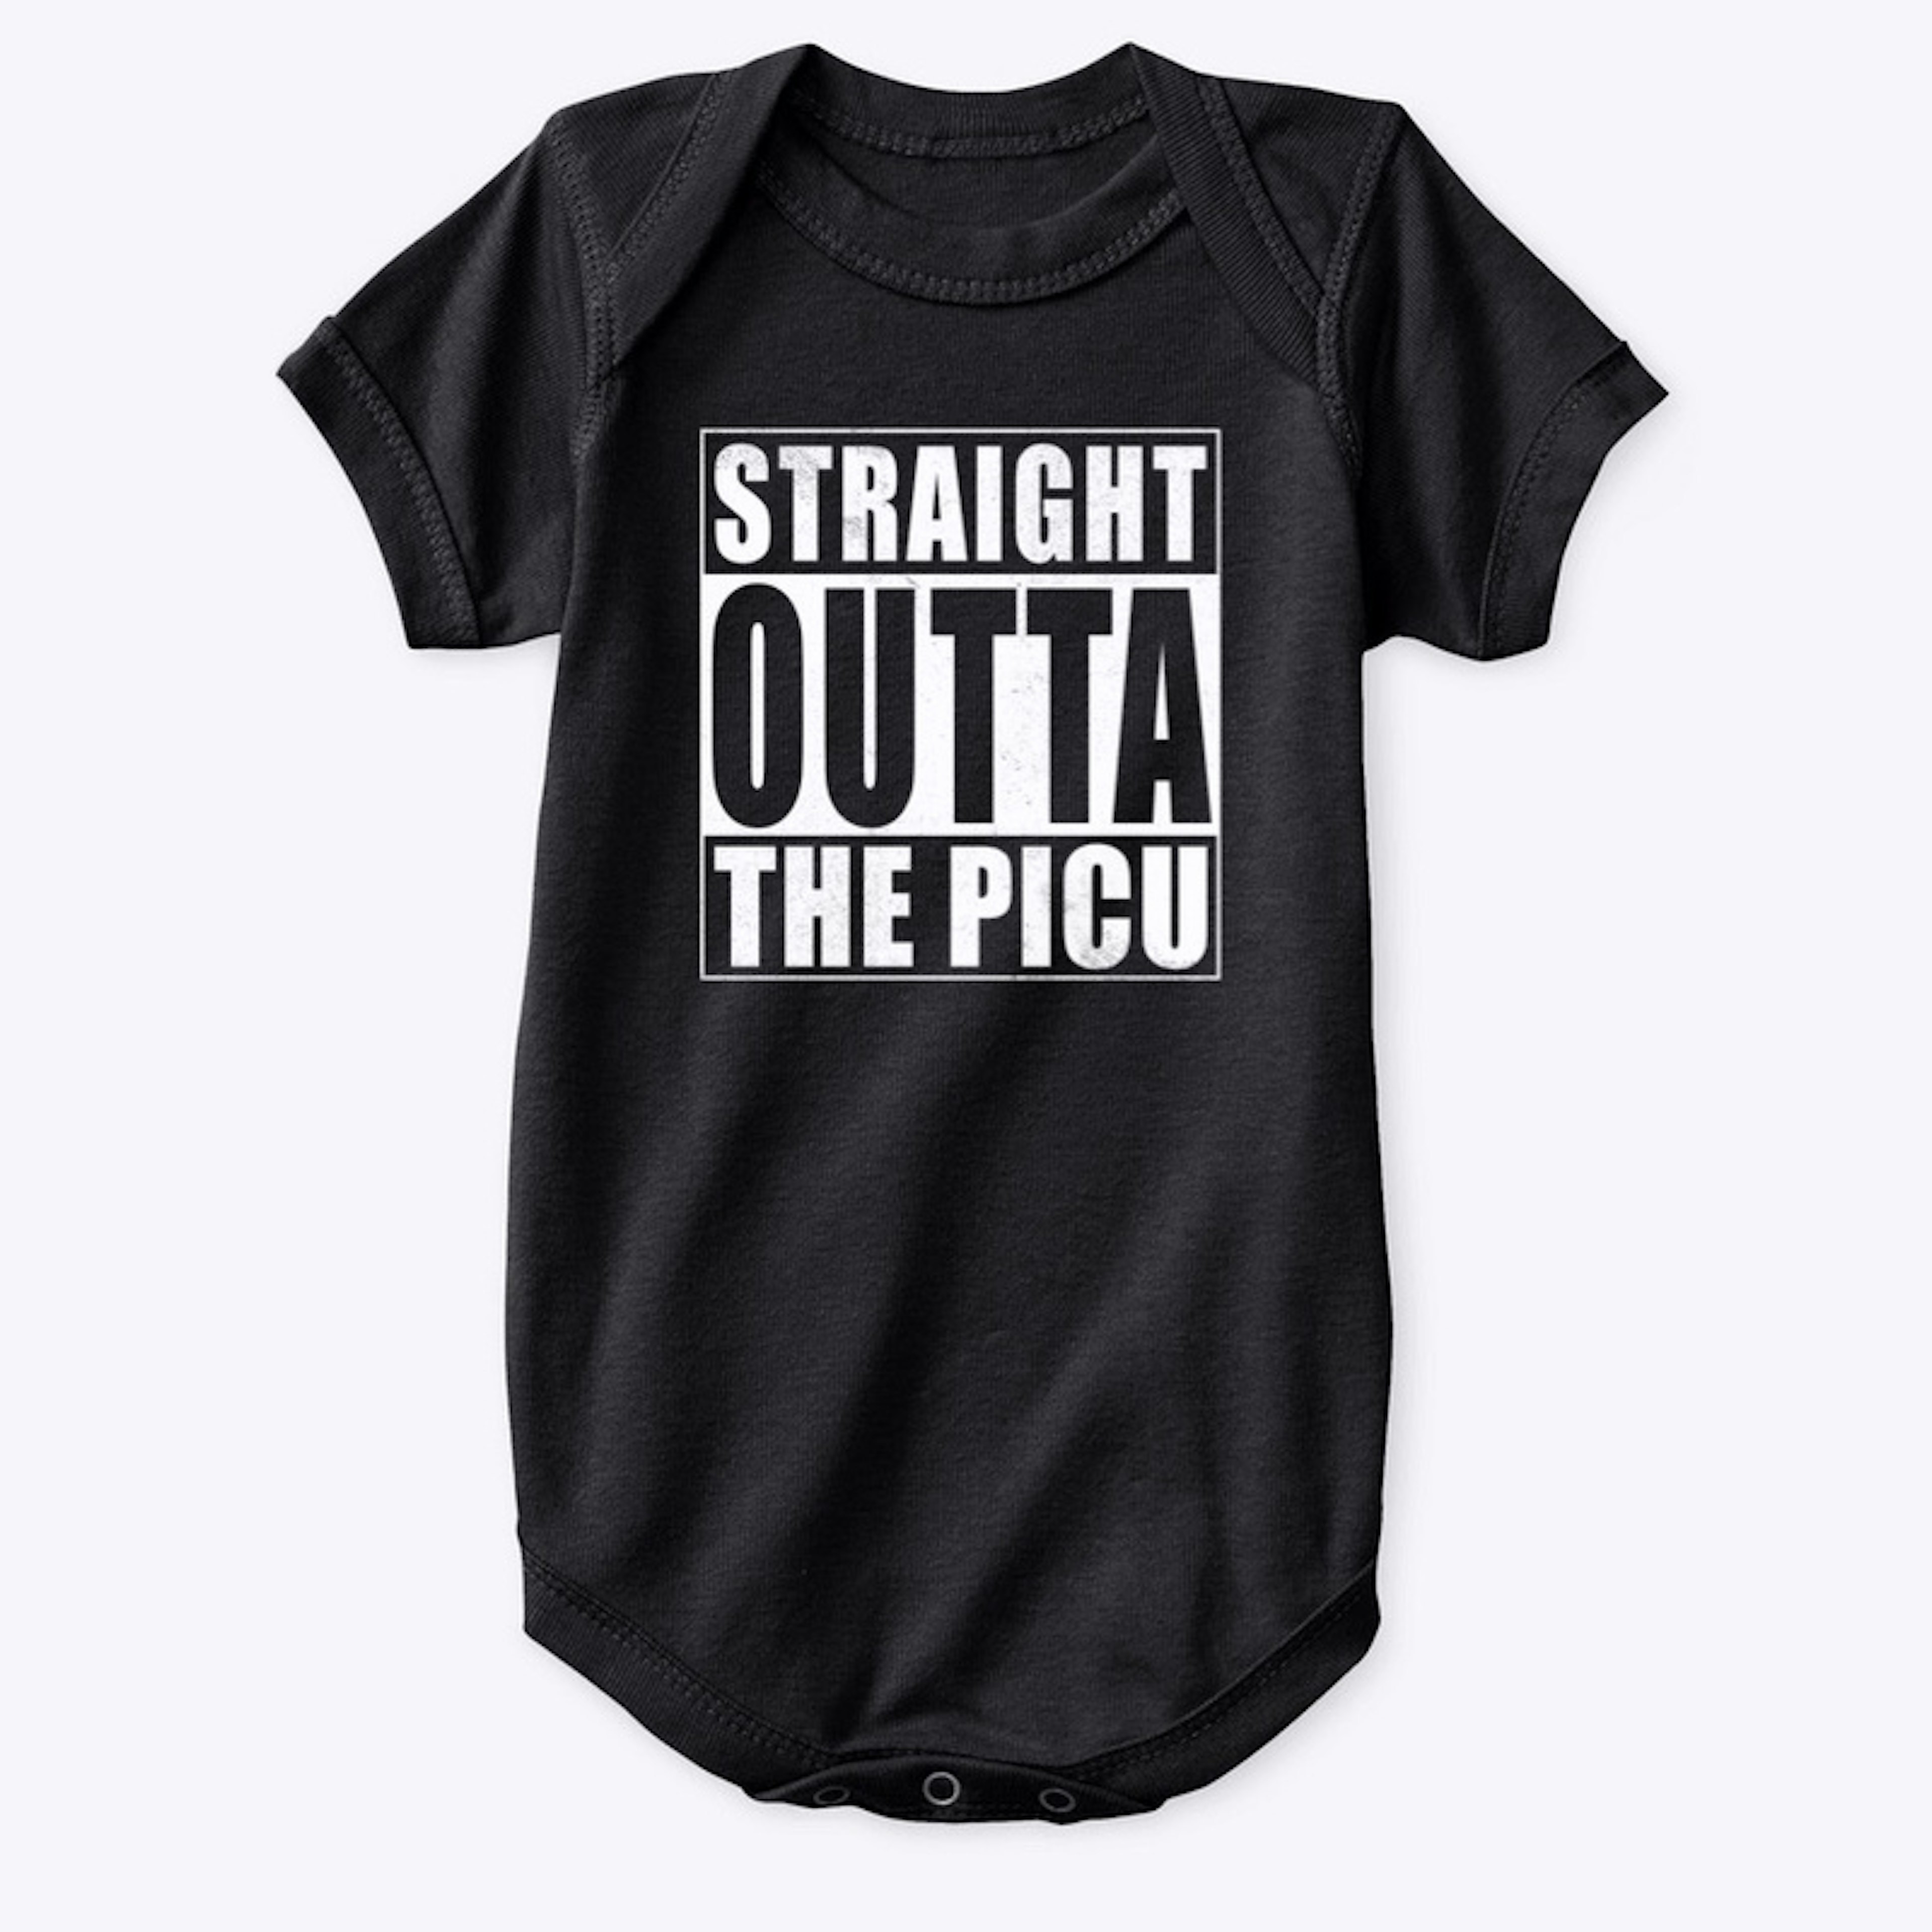 Straight Outta The PICU - Funny shirt